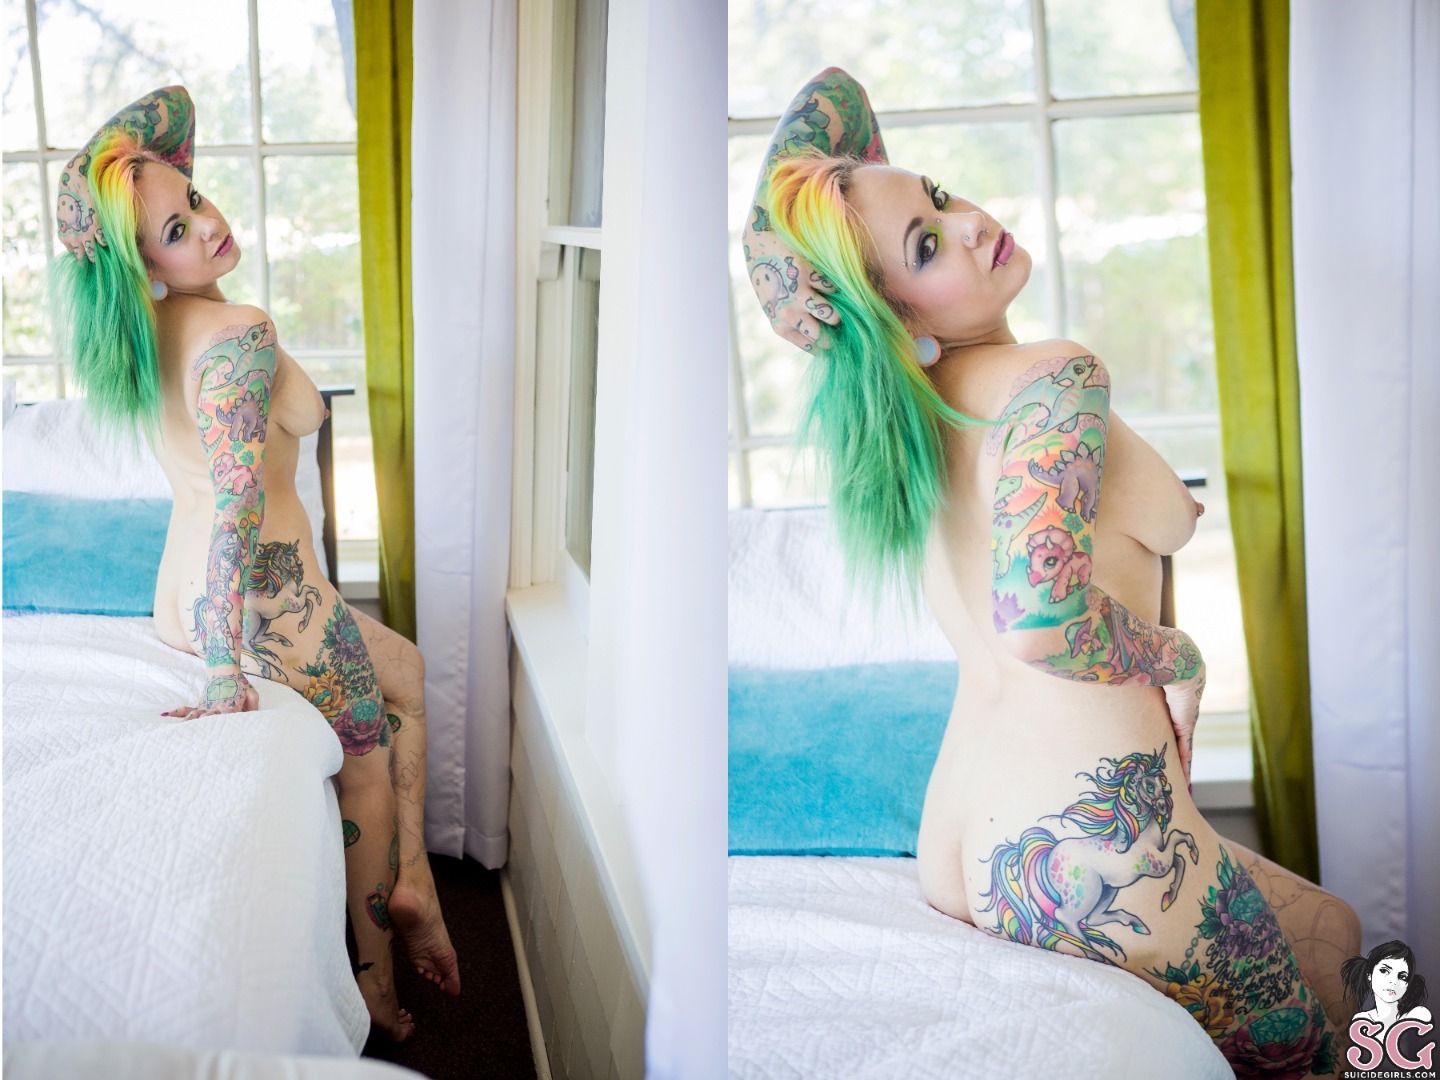 harmony vision two gorgeous models love lesbian sex #Vapor in #HopefulSet #Ethereal by #Sunshine for #SuicideGirls c. #2021 - #35yo #rainbowhair #greenhair #tattoos #bed #window #diptych